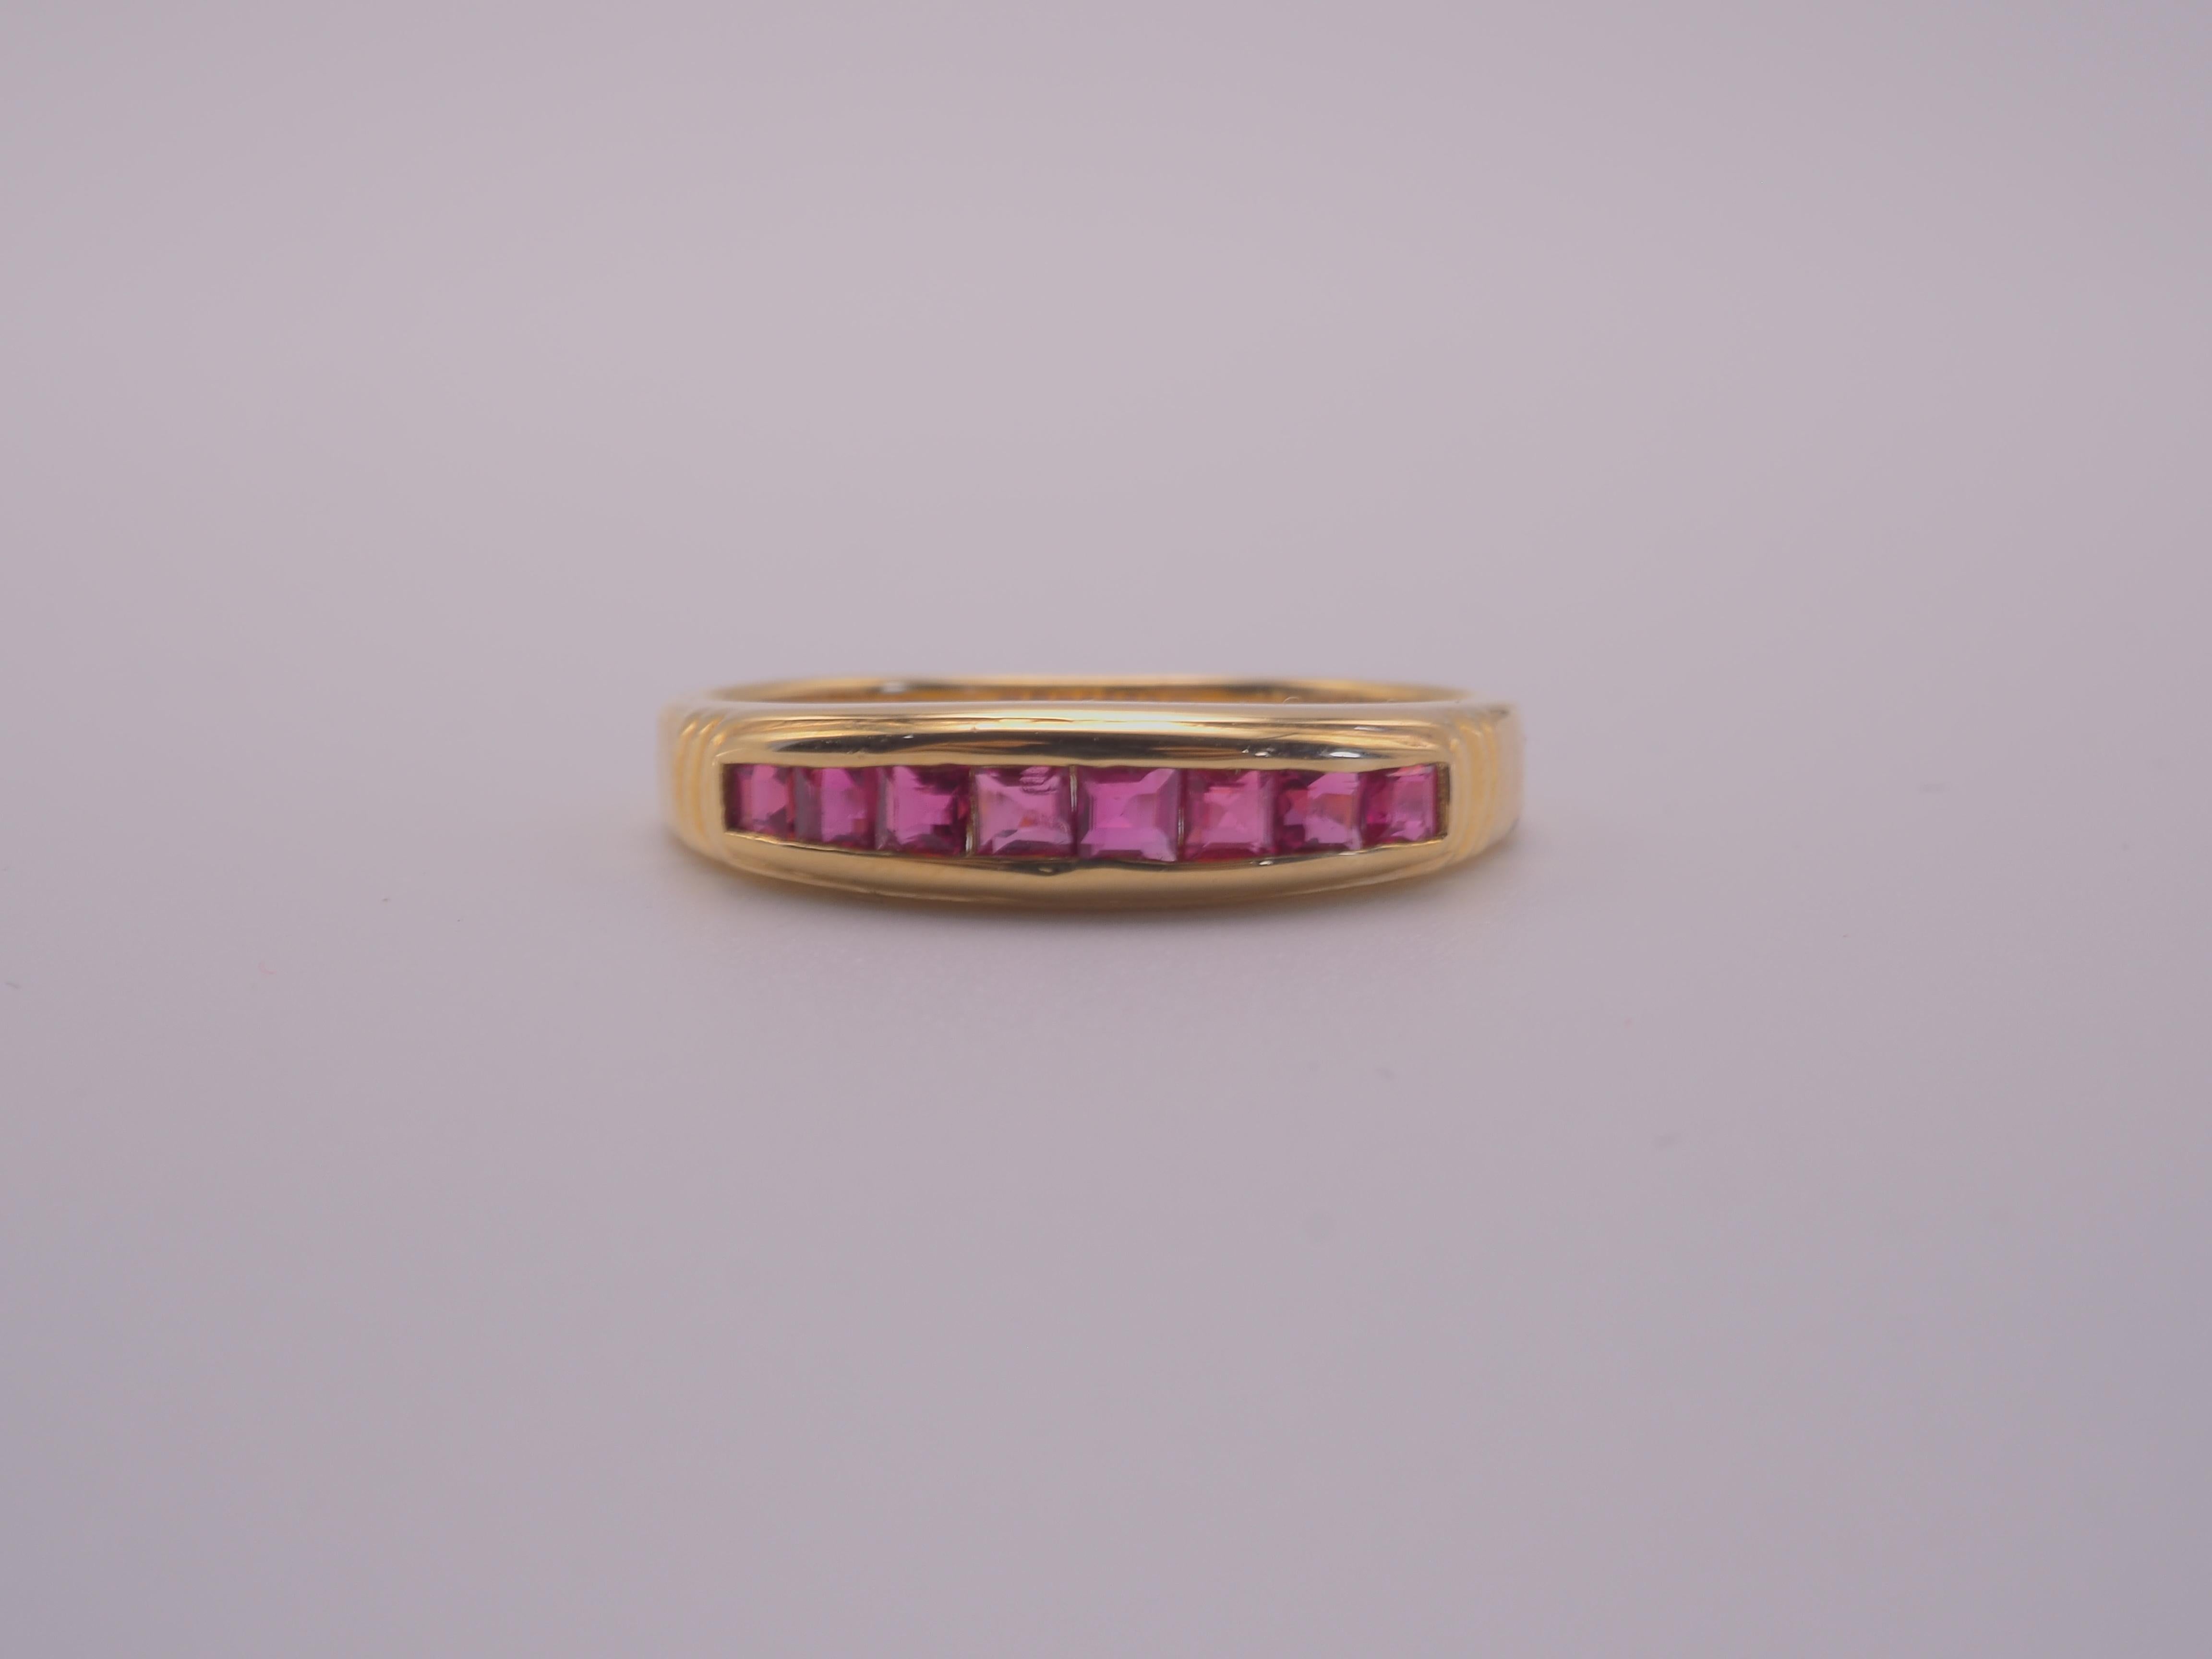 A gorgeous luxury Neo-vintage band ring that is both suitable for all sexes. This ring has one row of 8 beautiful, squared Thai rubies channeled nicely into the band. The square cut rubies vary in sizes and have a beautiful pinkish red hue. This